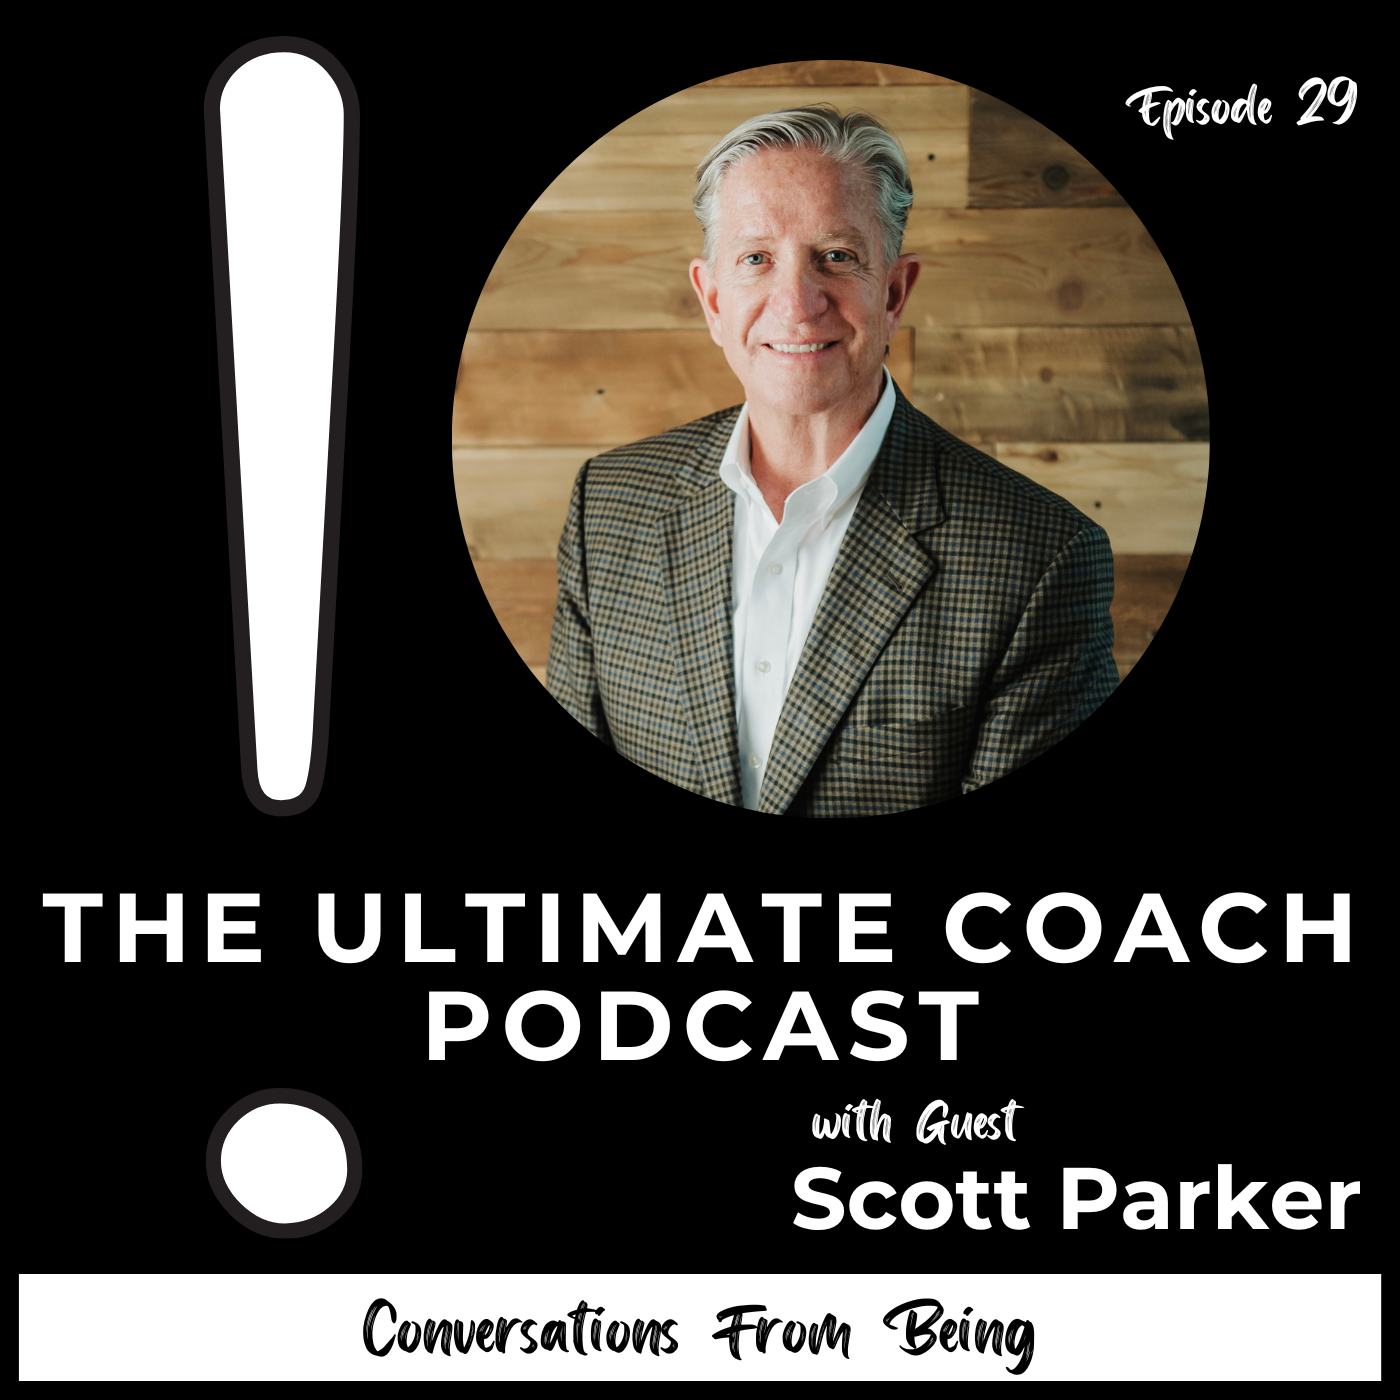 Being the Best Friend of the Ultimate Coach - Scott Parker